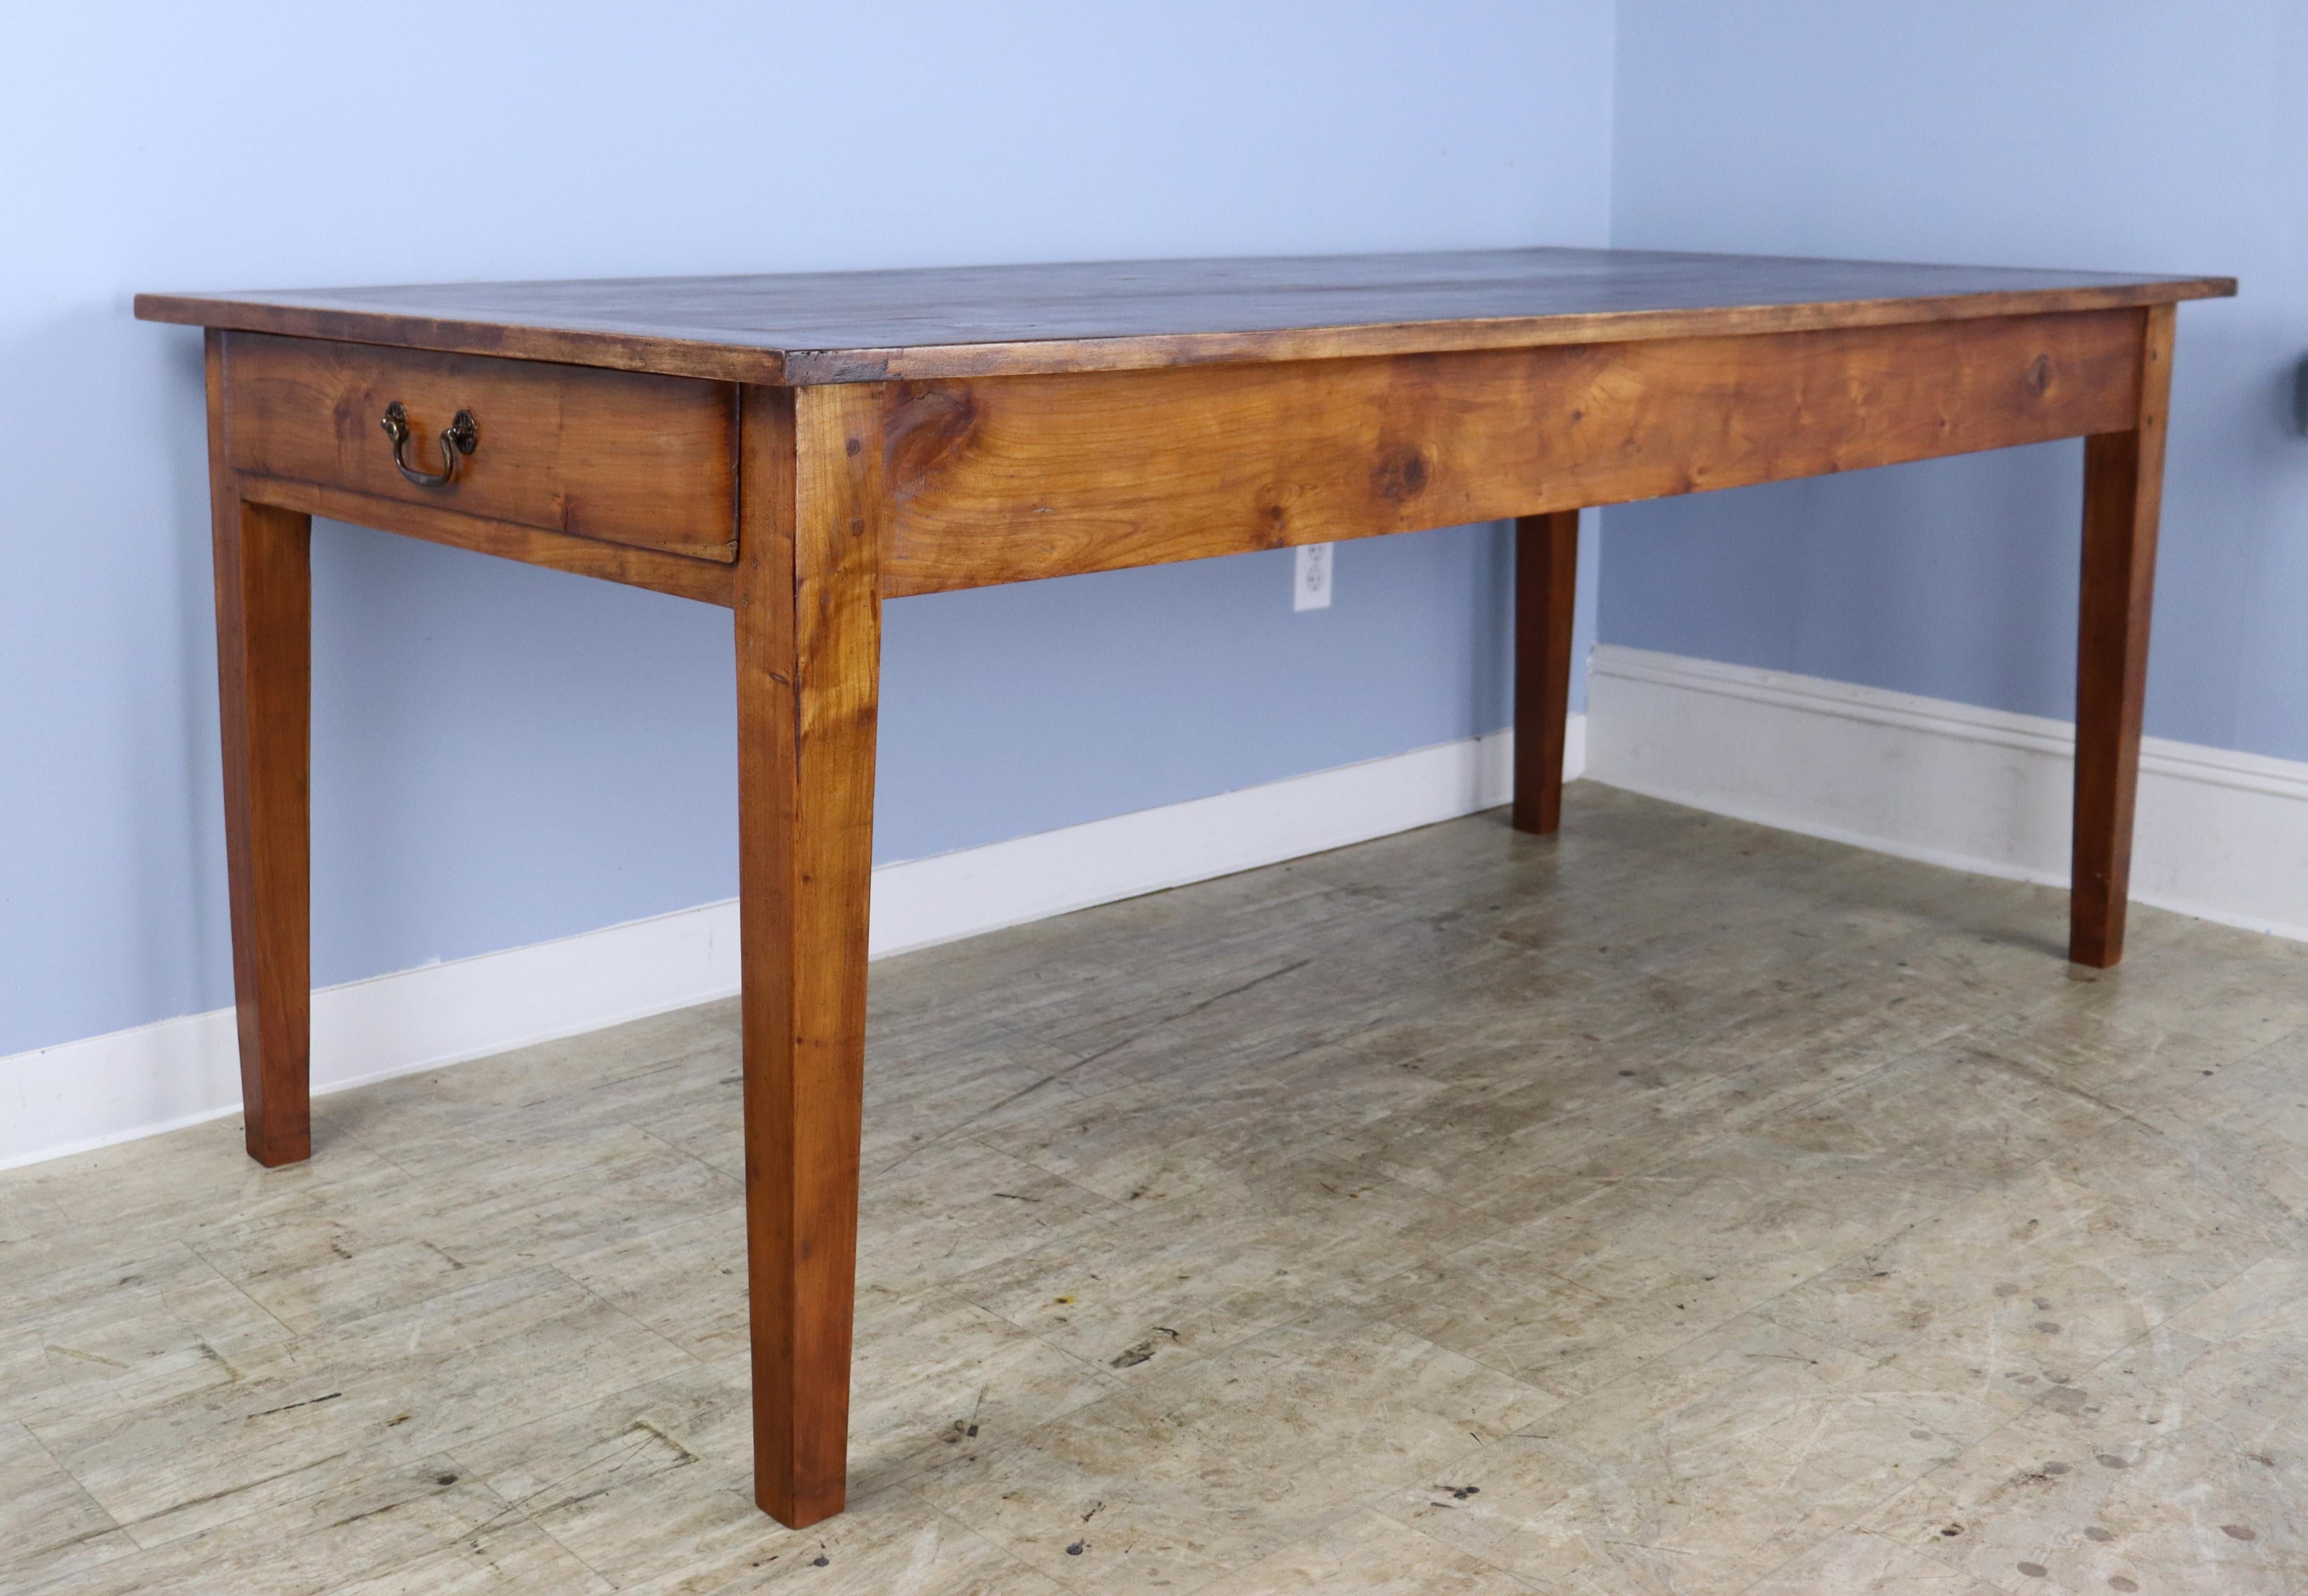 A simple and elegant fruitwood farm table with 72 inches between the legs on the long side. One drawer at one end and breadboard ends. Tapered legs, nicely pegged at the apron, which is 24.5 inches high. The table top has lots of good grain, with